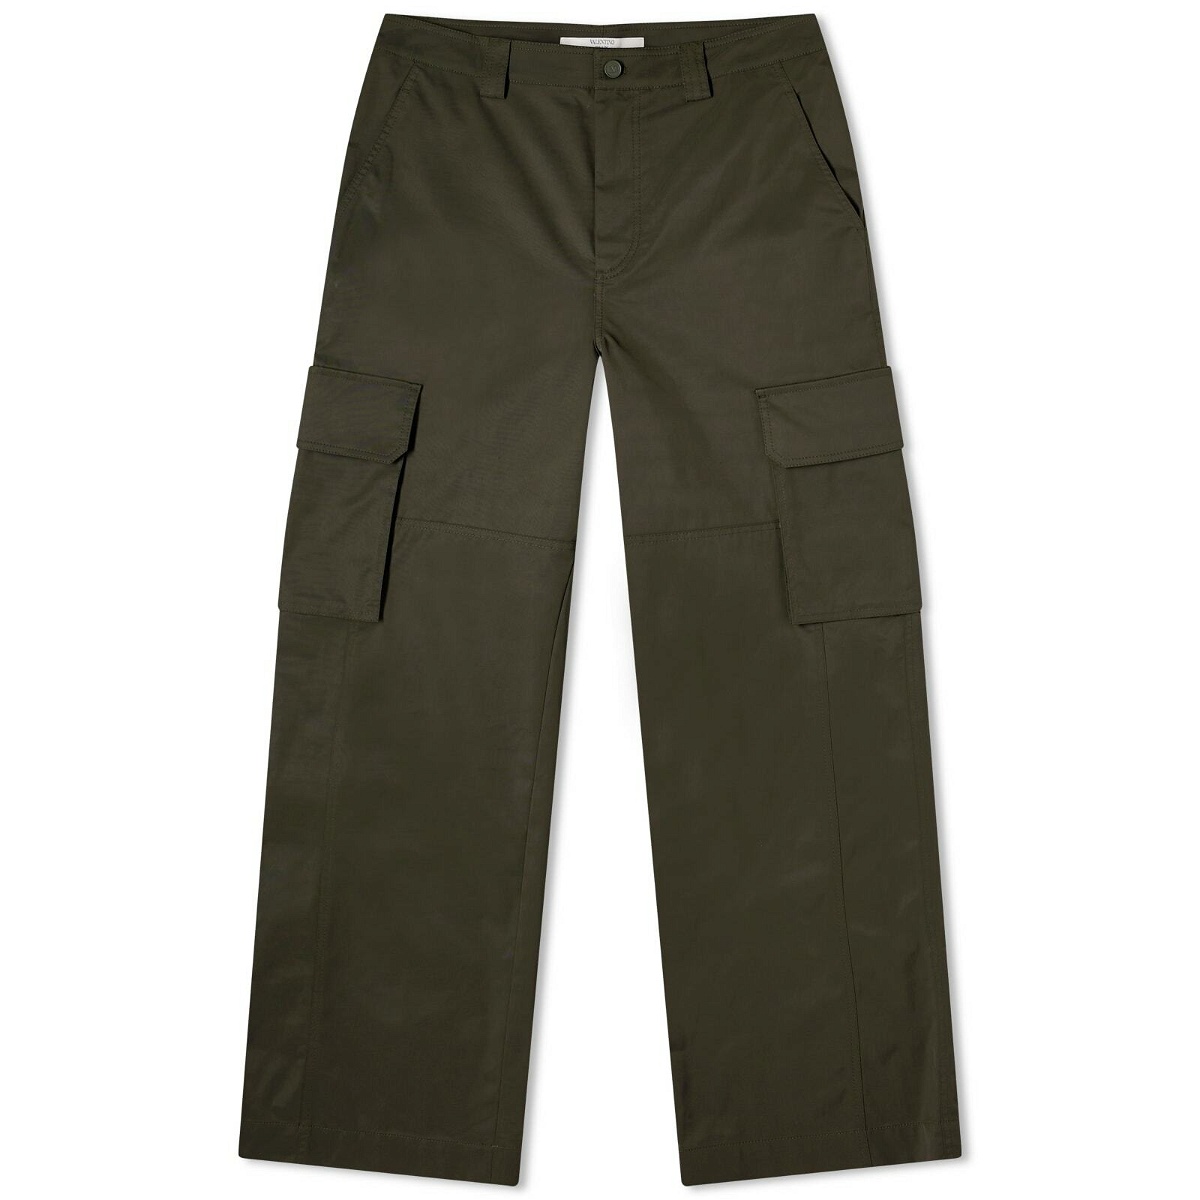 $228 POLO RALPH LAUREN Men Relaxed Fit Distressed Canvas Army Utility Chino  Pant | eBay